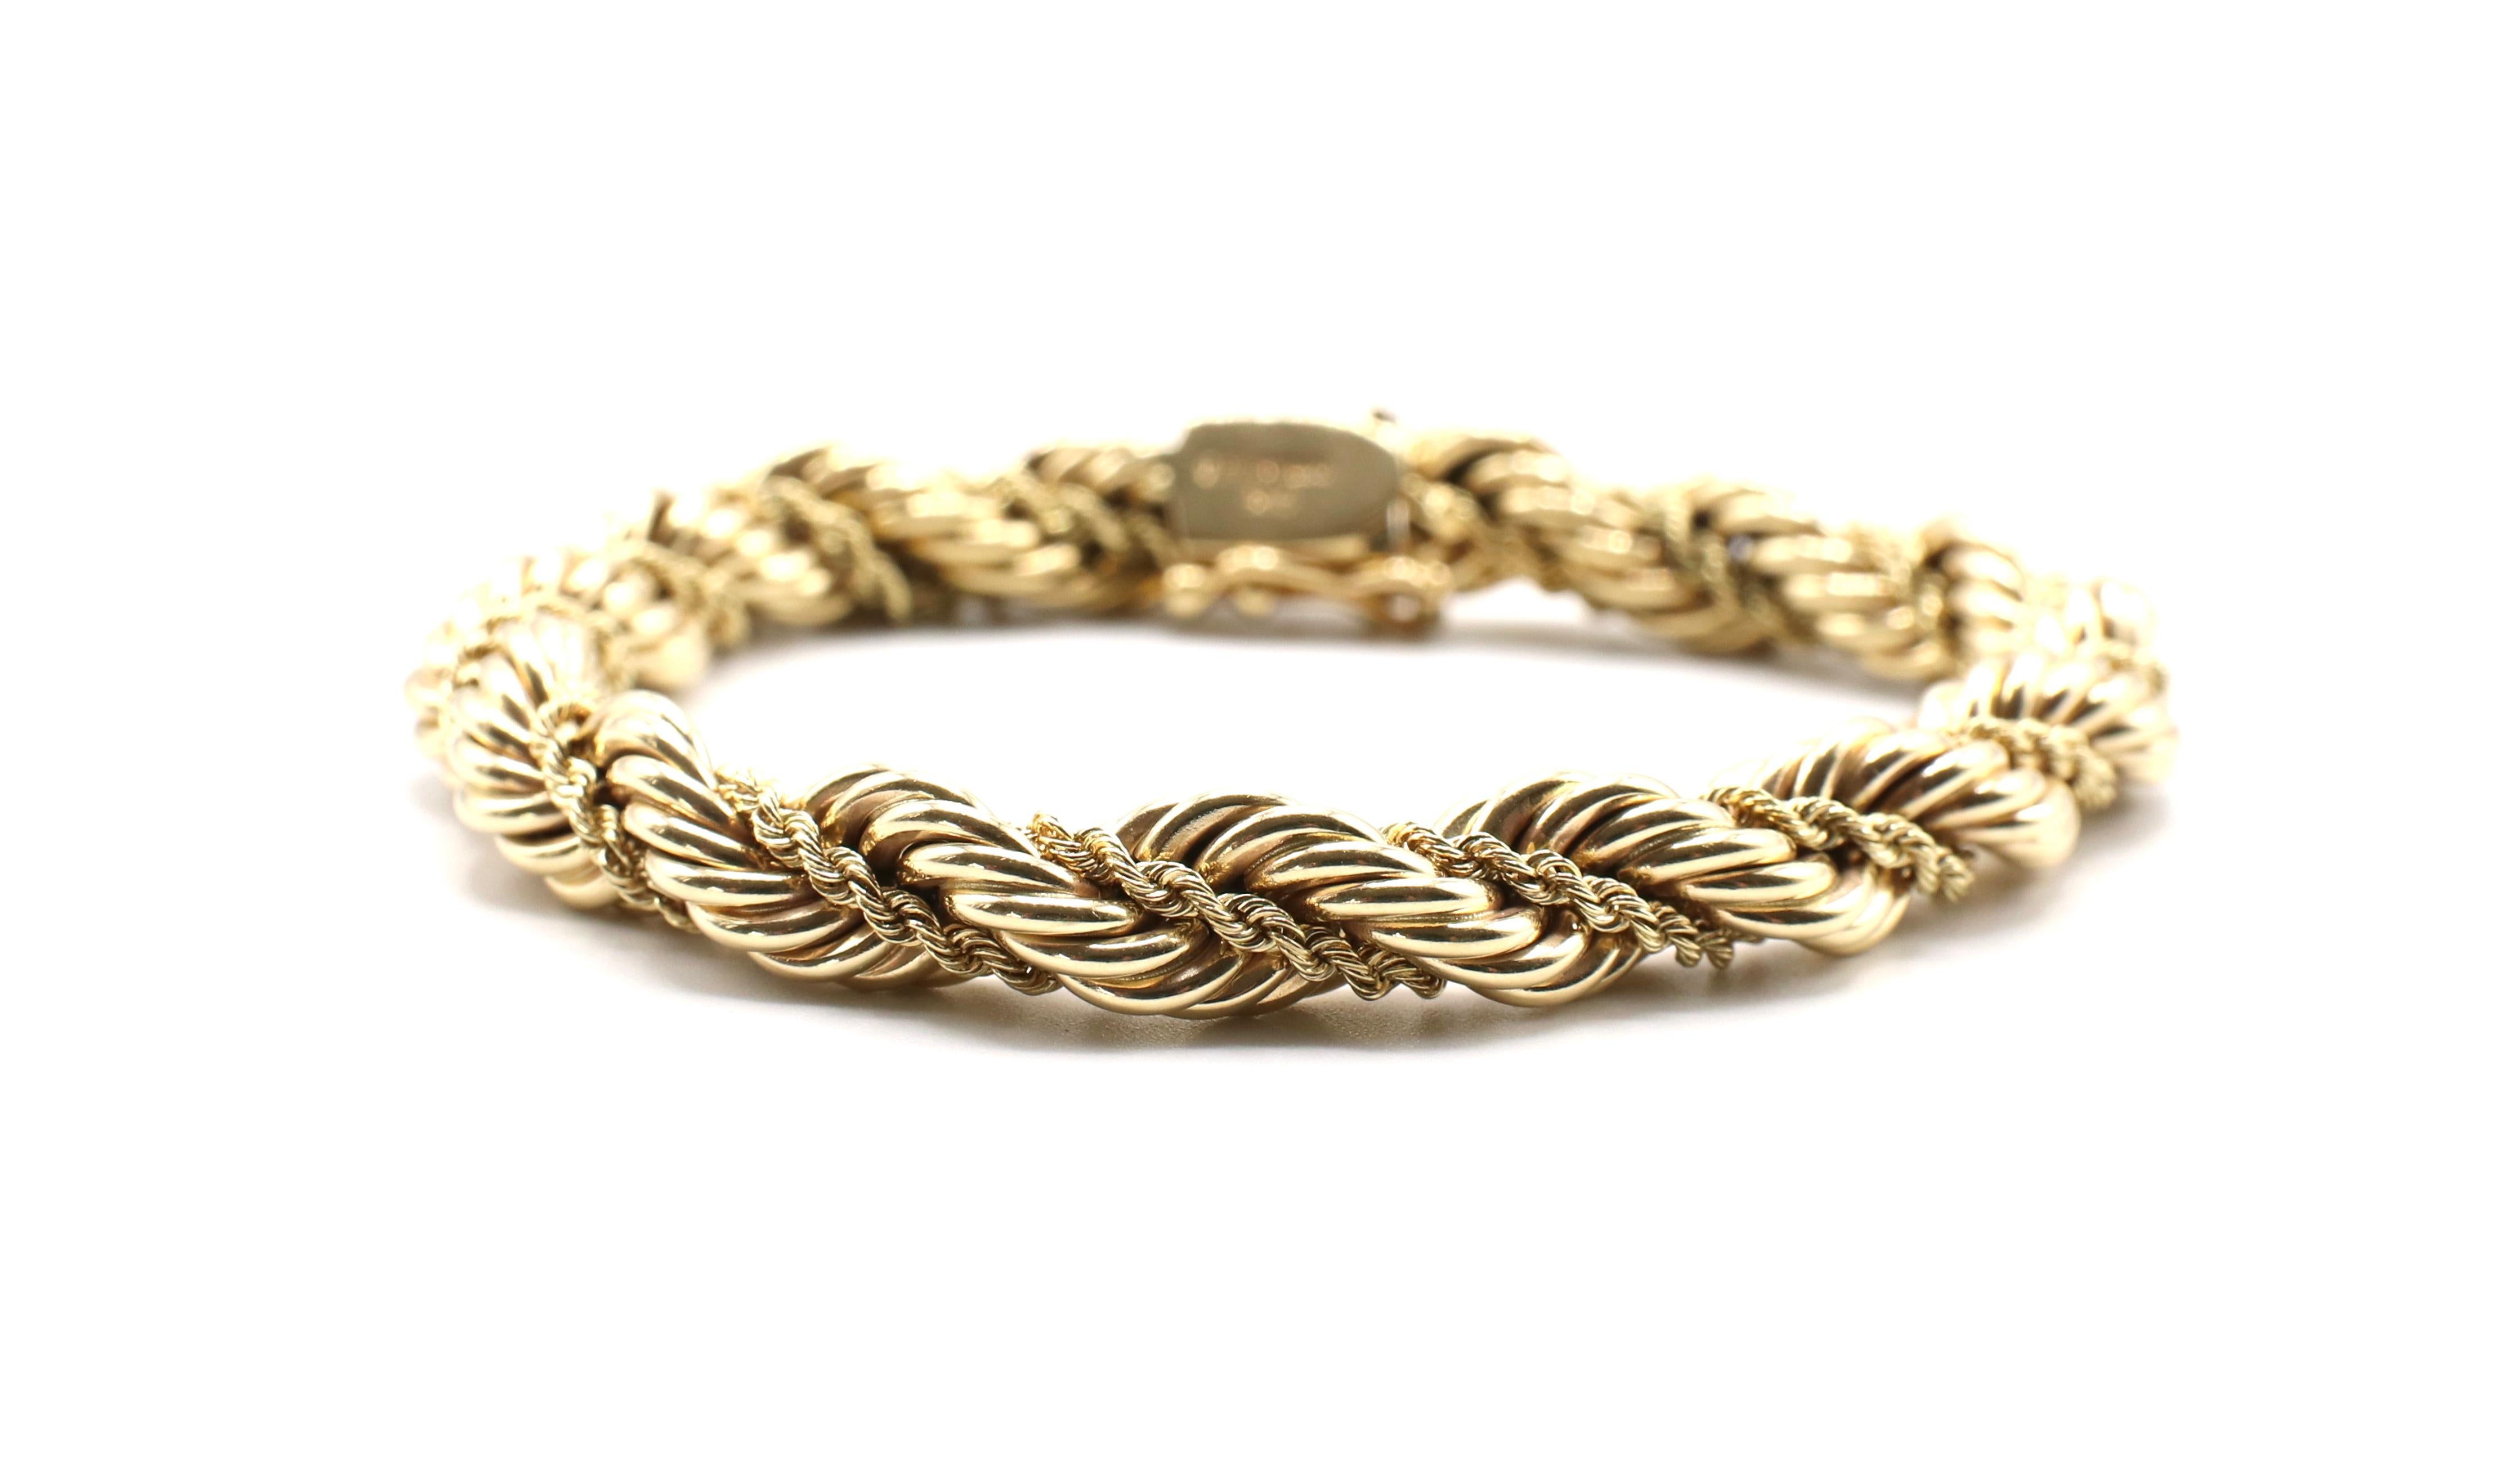 Vintage Tiffany & Co. 14K Yellow Gold Twisted Rope Bracelet 

Metal: 14k yellow gold
Weight: 22.32 grams
Length: 7.5 inches
Width: Approx. 7.2mm 
Signed: Tiffany & Co. 585
Recently polished